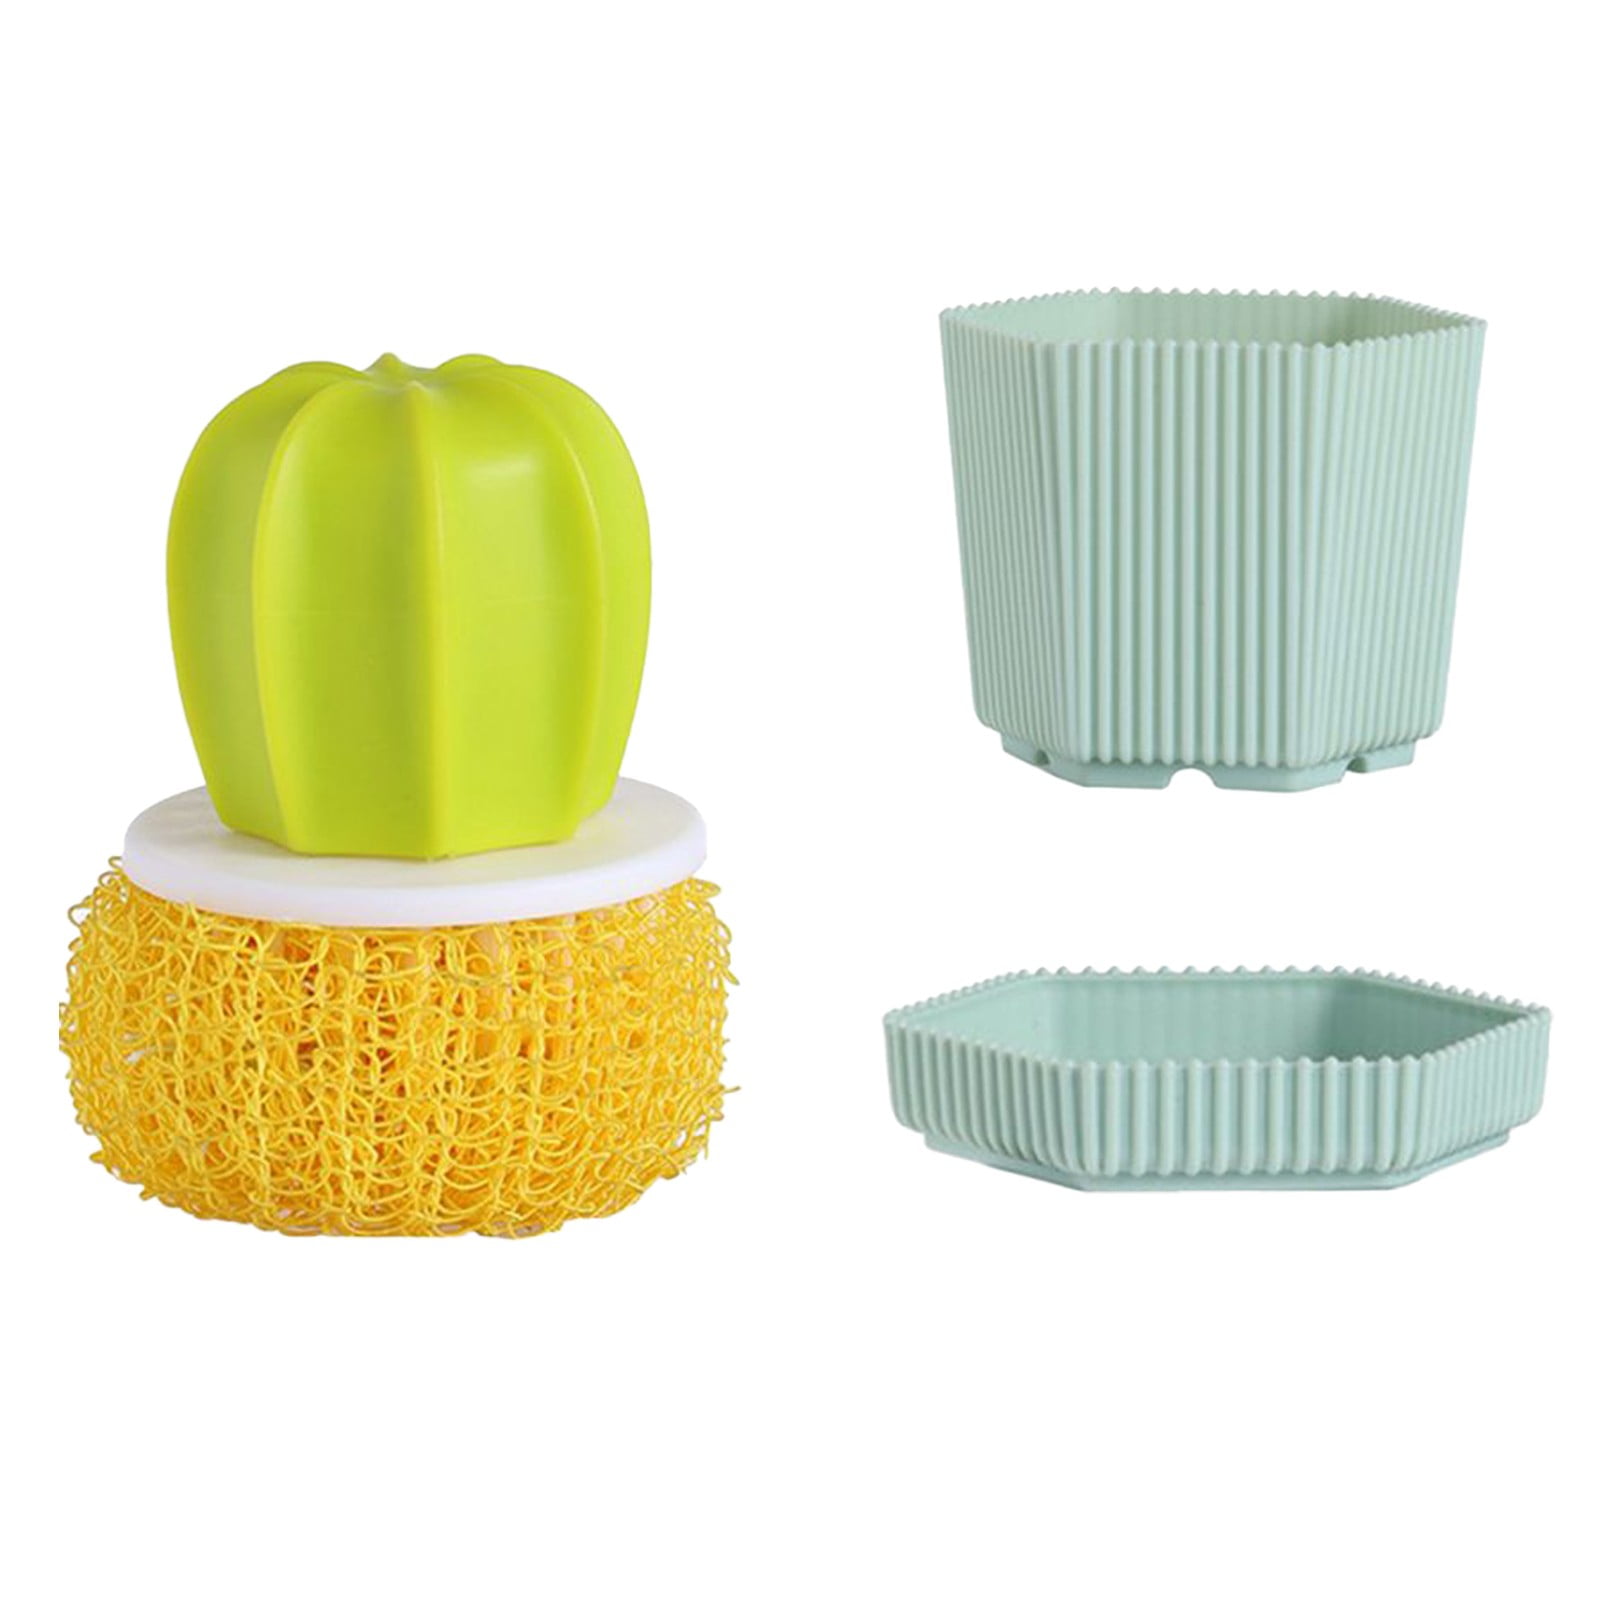 cleaning gadget for home nano loofah ball cleaning brush bathroom cool  gadgets dishwasher dish sponge house